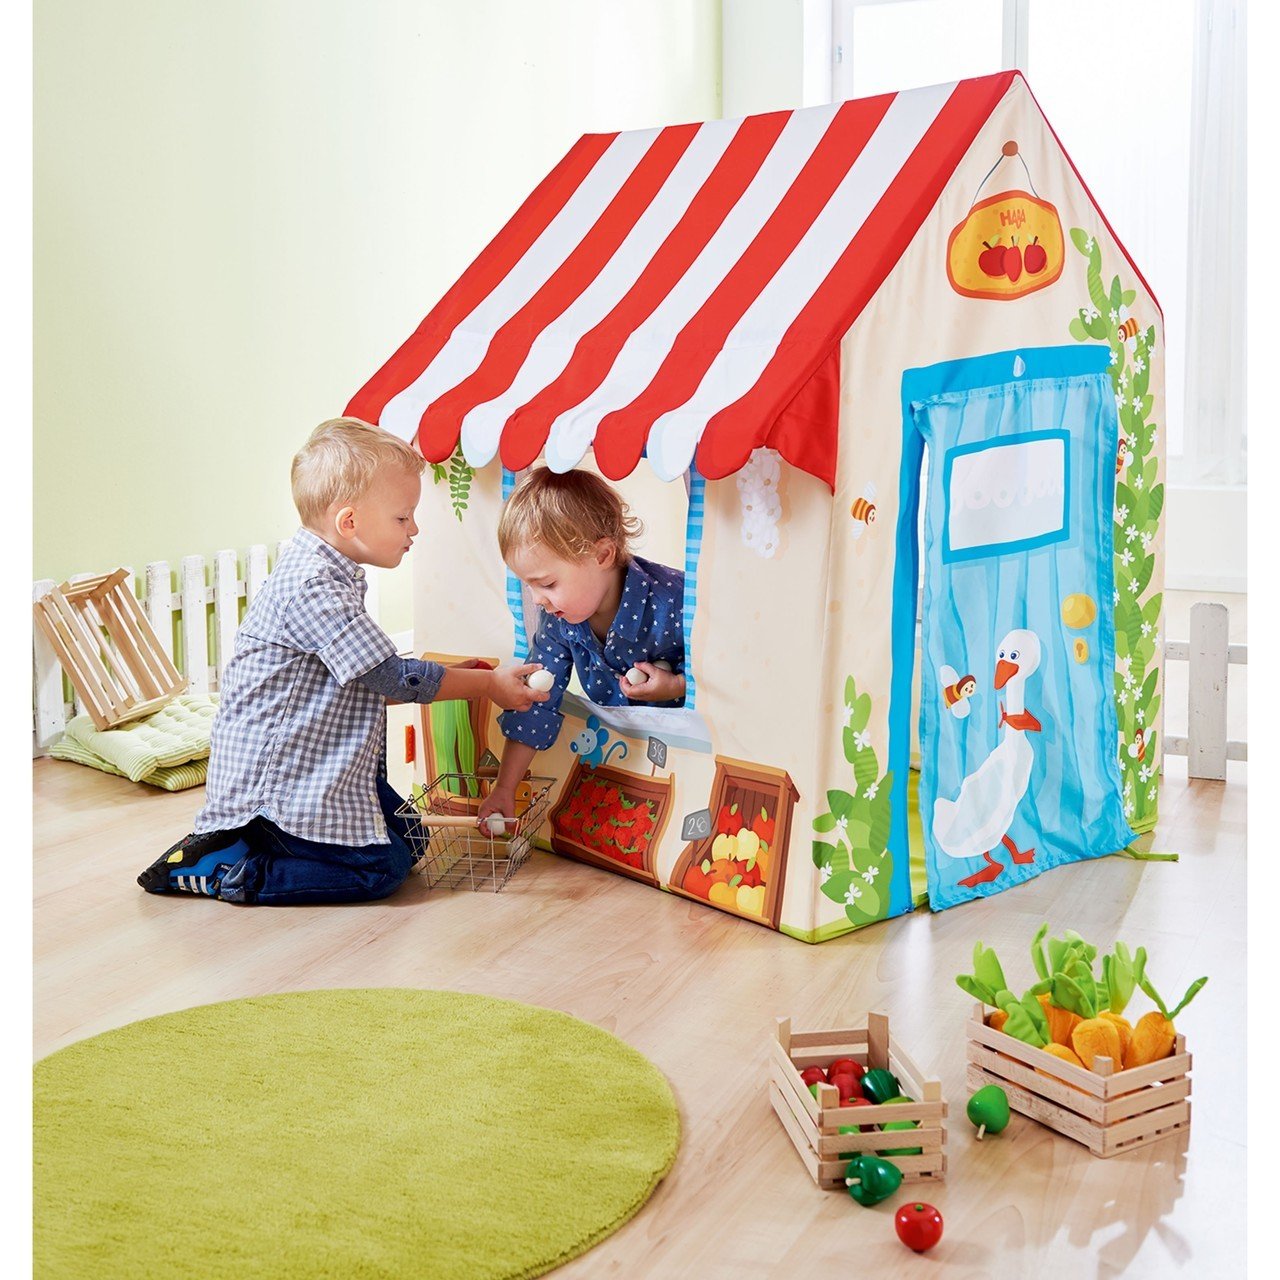 Haba Grocery Shop Play Tent